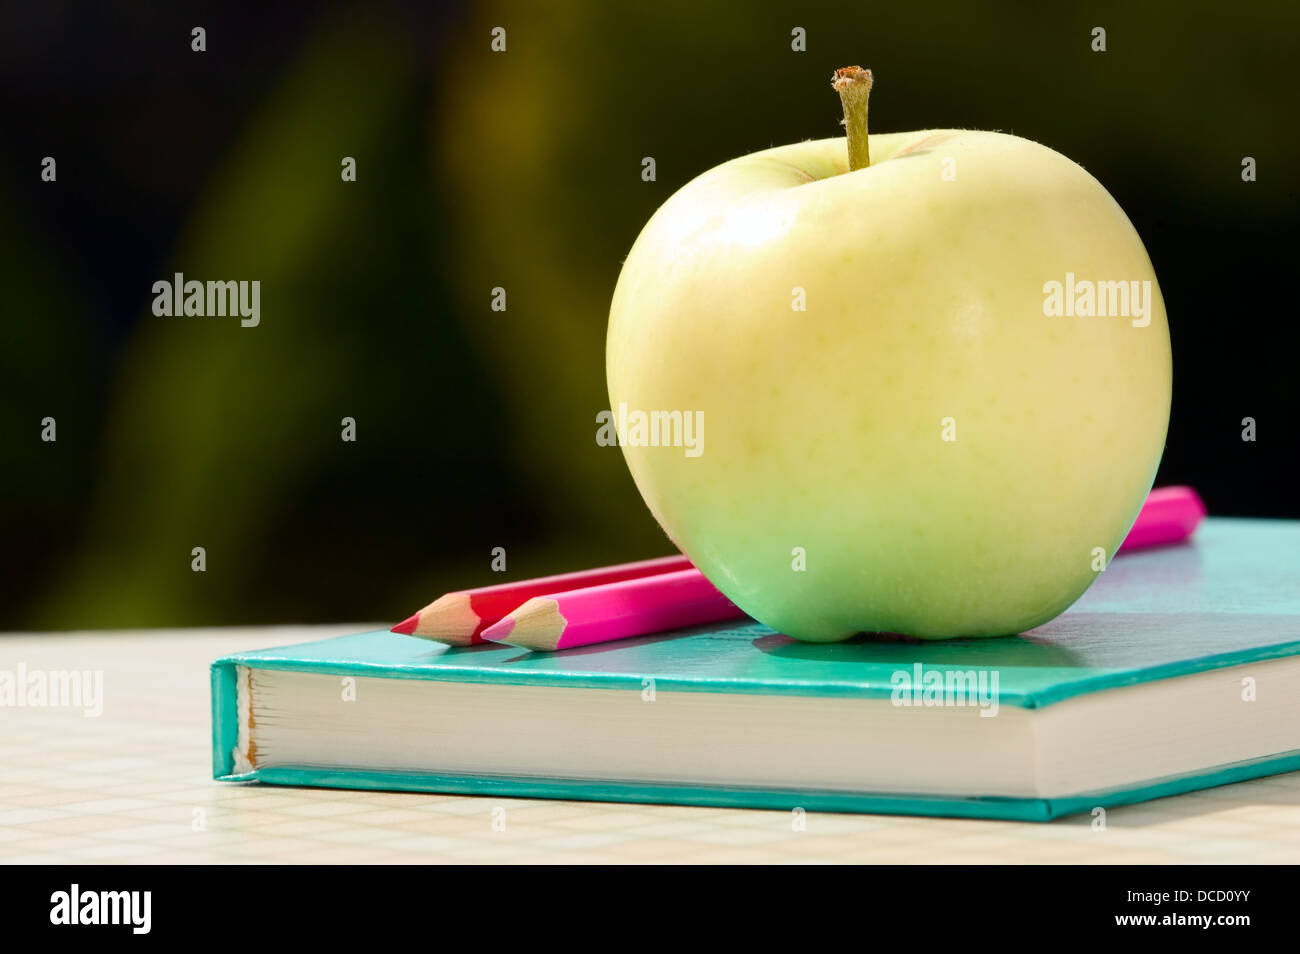 Tools for school with apple placed near on green background Stock Photo